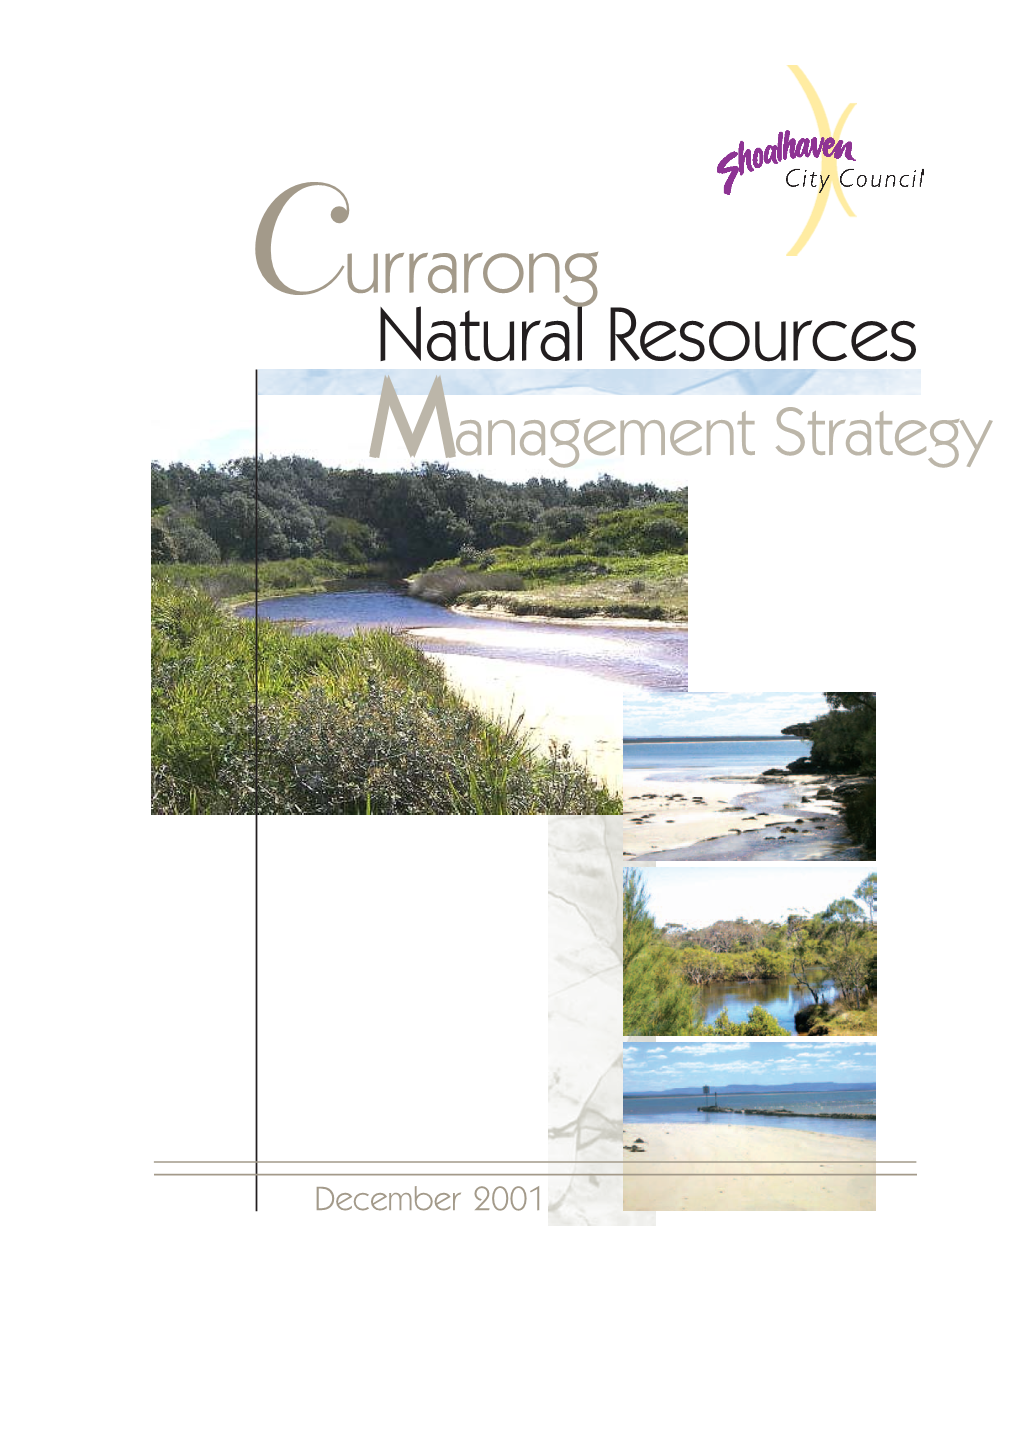 Currarong Natural Resources Management Strategy